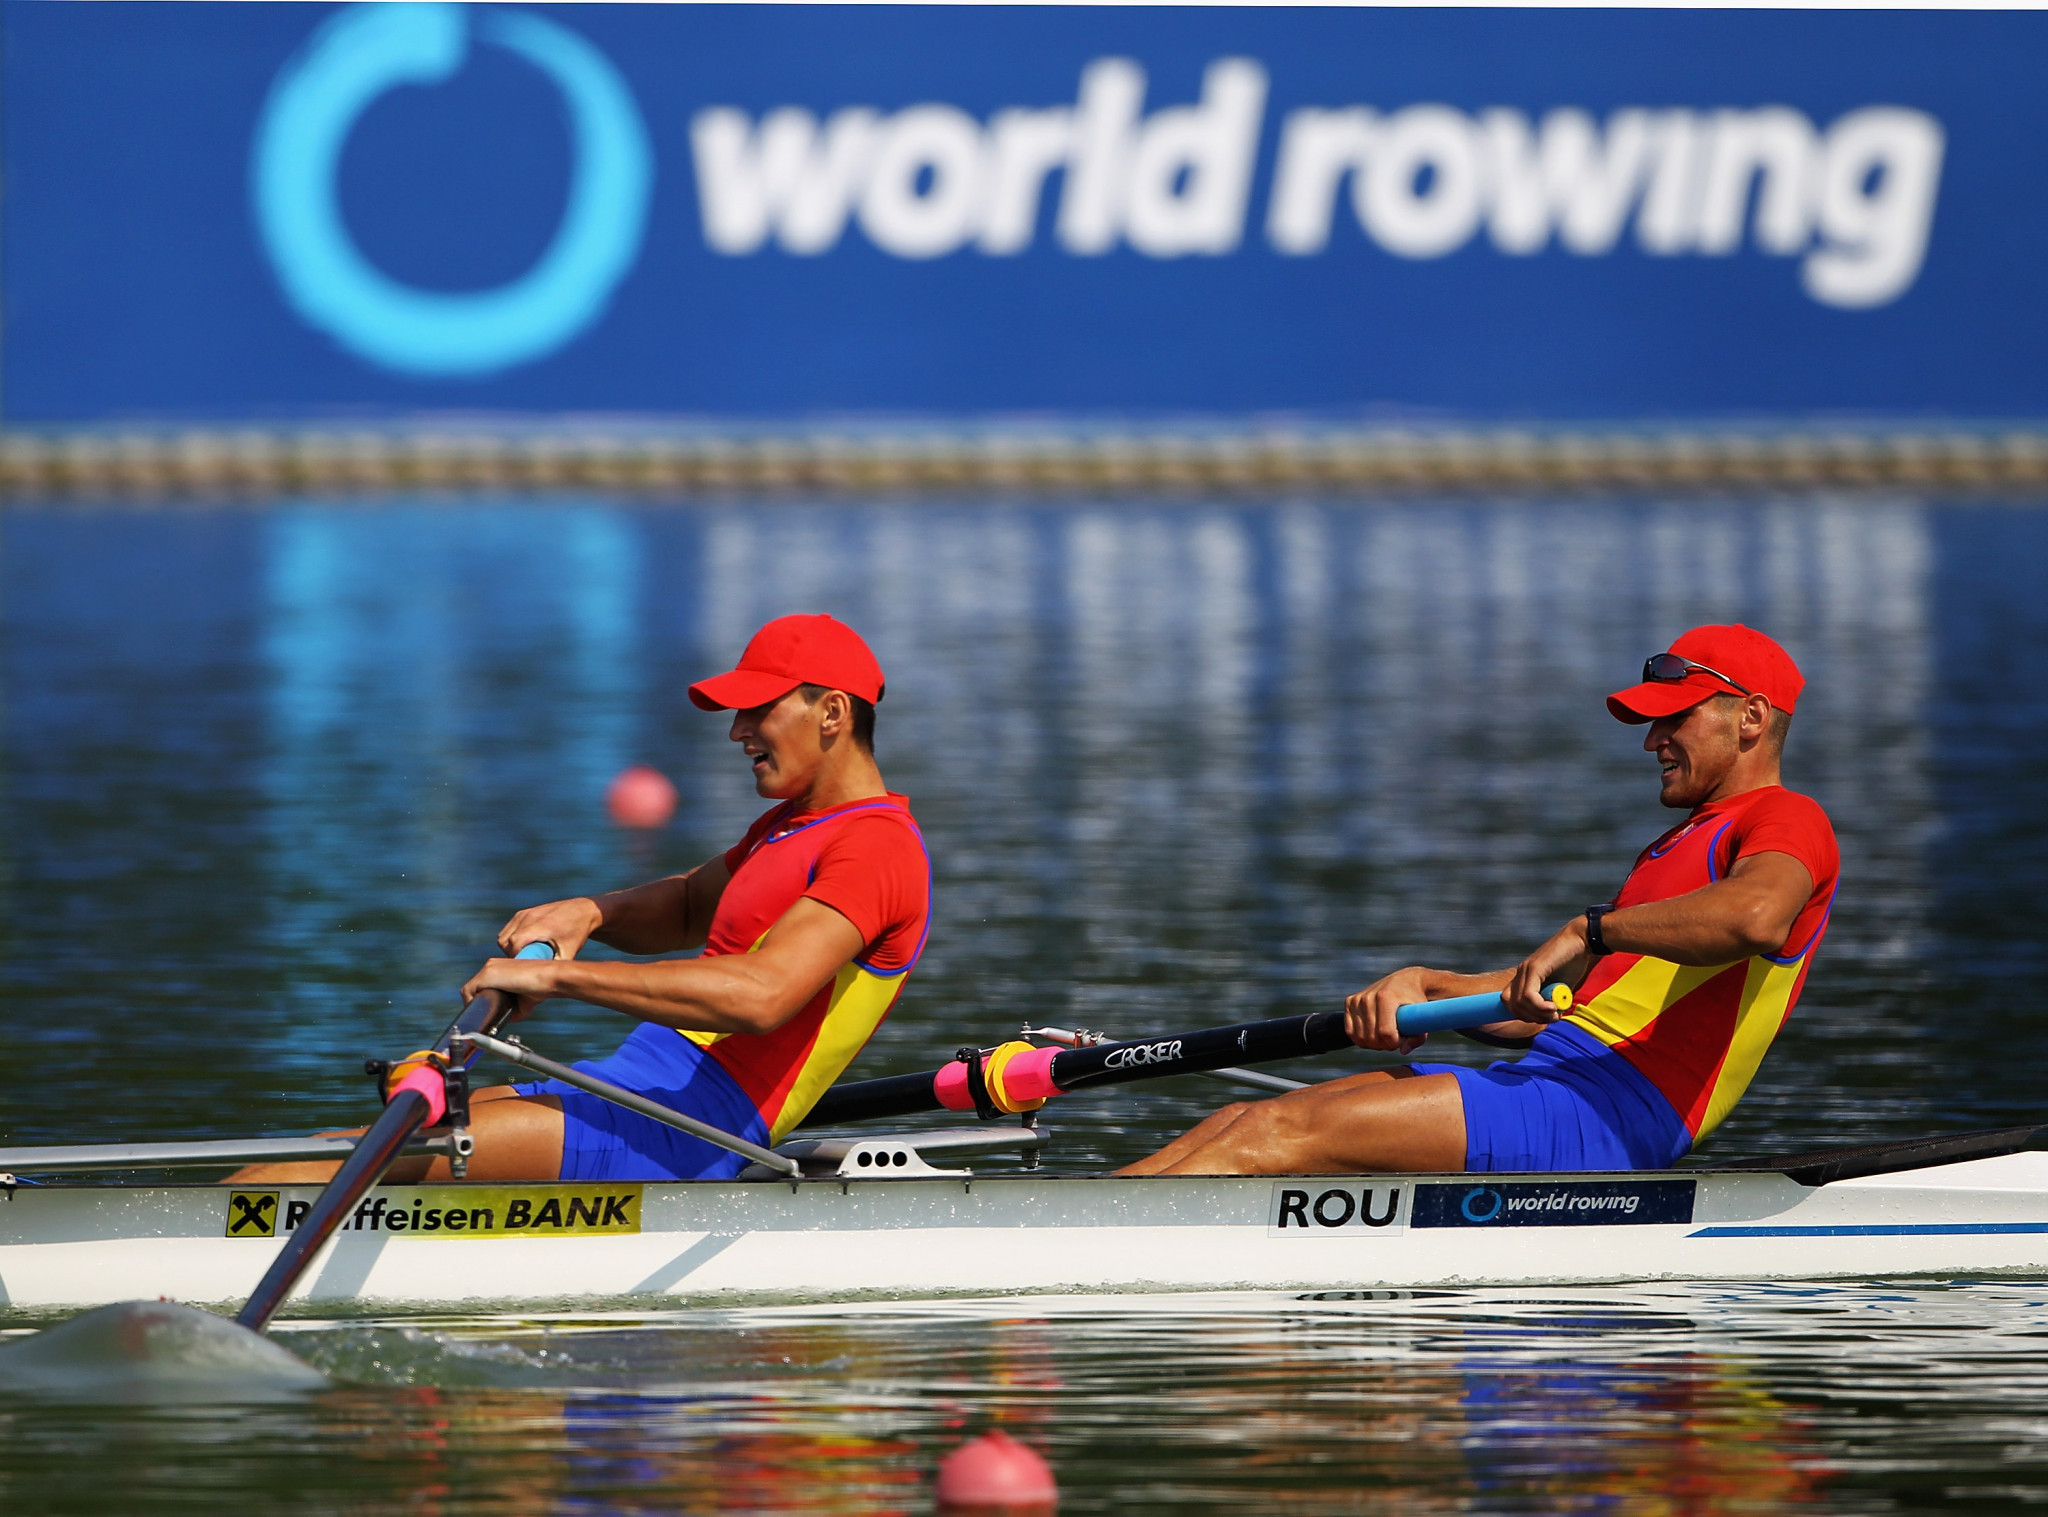 Plovdiv in Bulgaria have submitted bids for a series of World Rowing events ©Getty Images